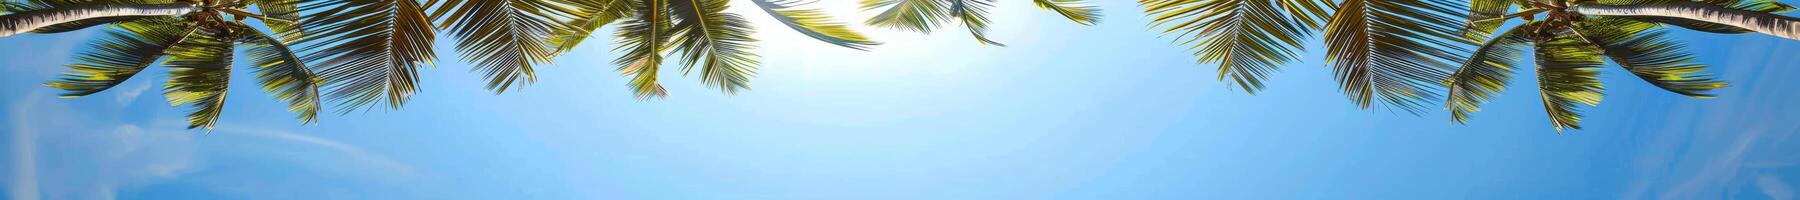 Tropical Palm Trees Framing Blue Sky in Summer photo